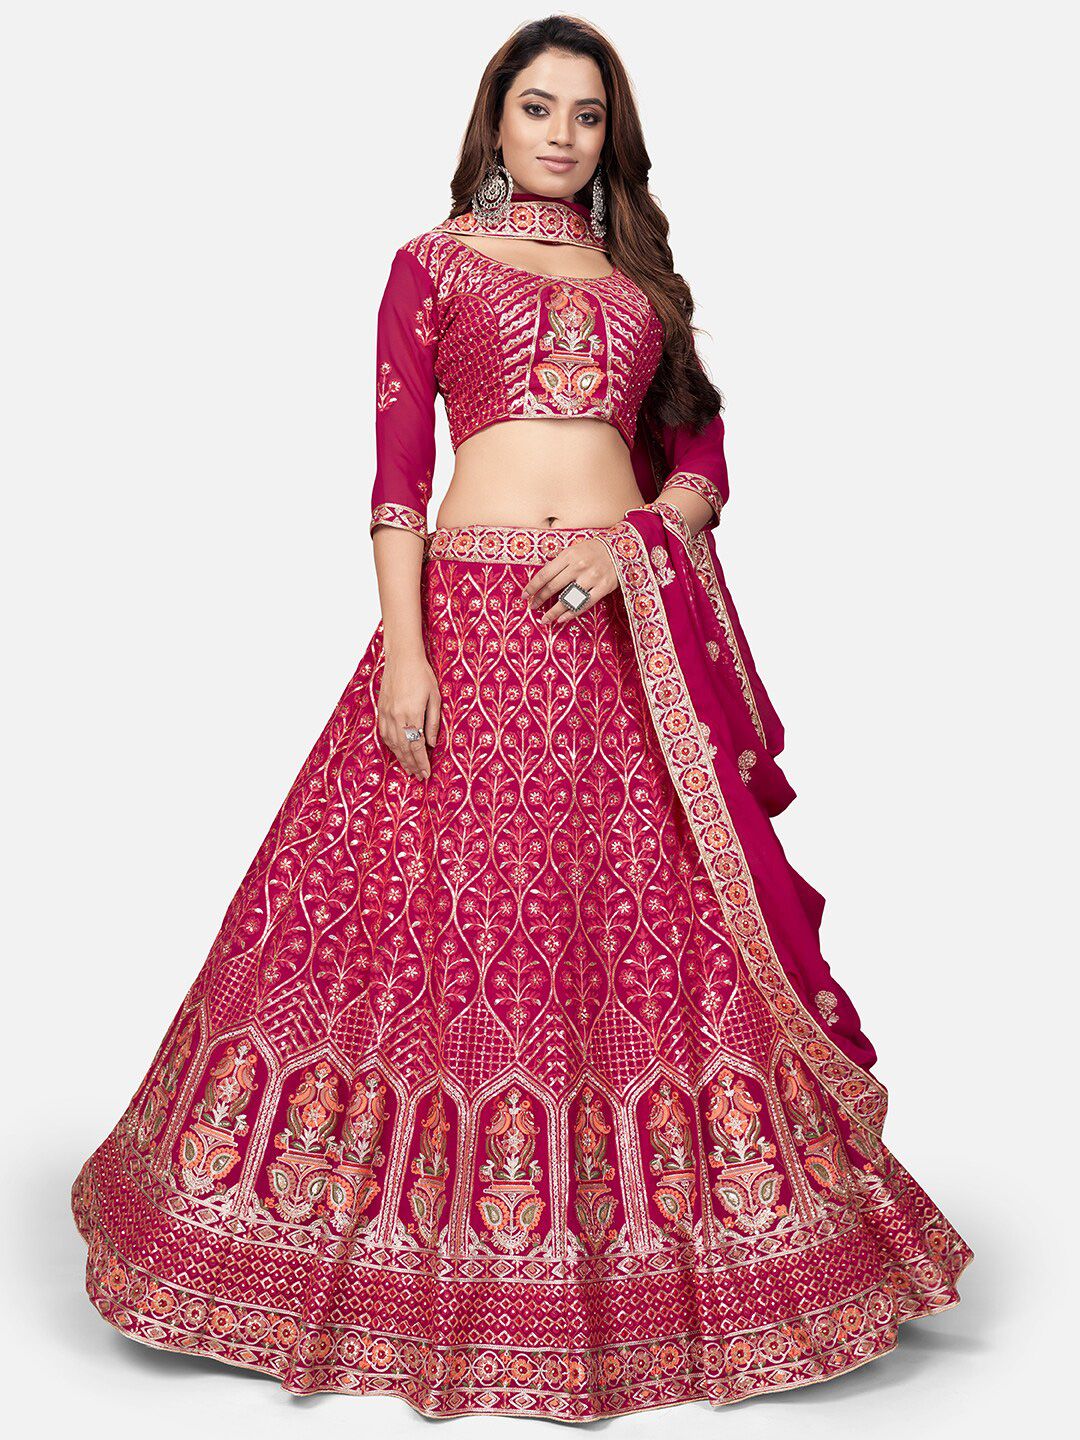 WHITE FIRE Fuchsia & Golded Semi-Stitched Lehenga & Unstitched Blouse With Dupatta Price in India